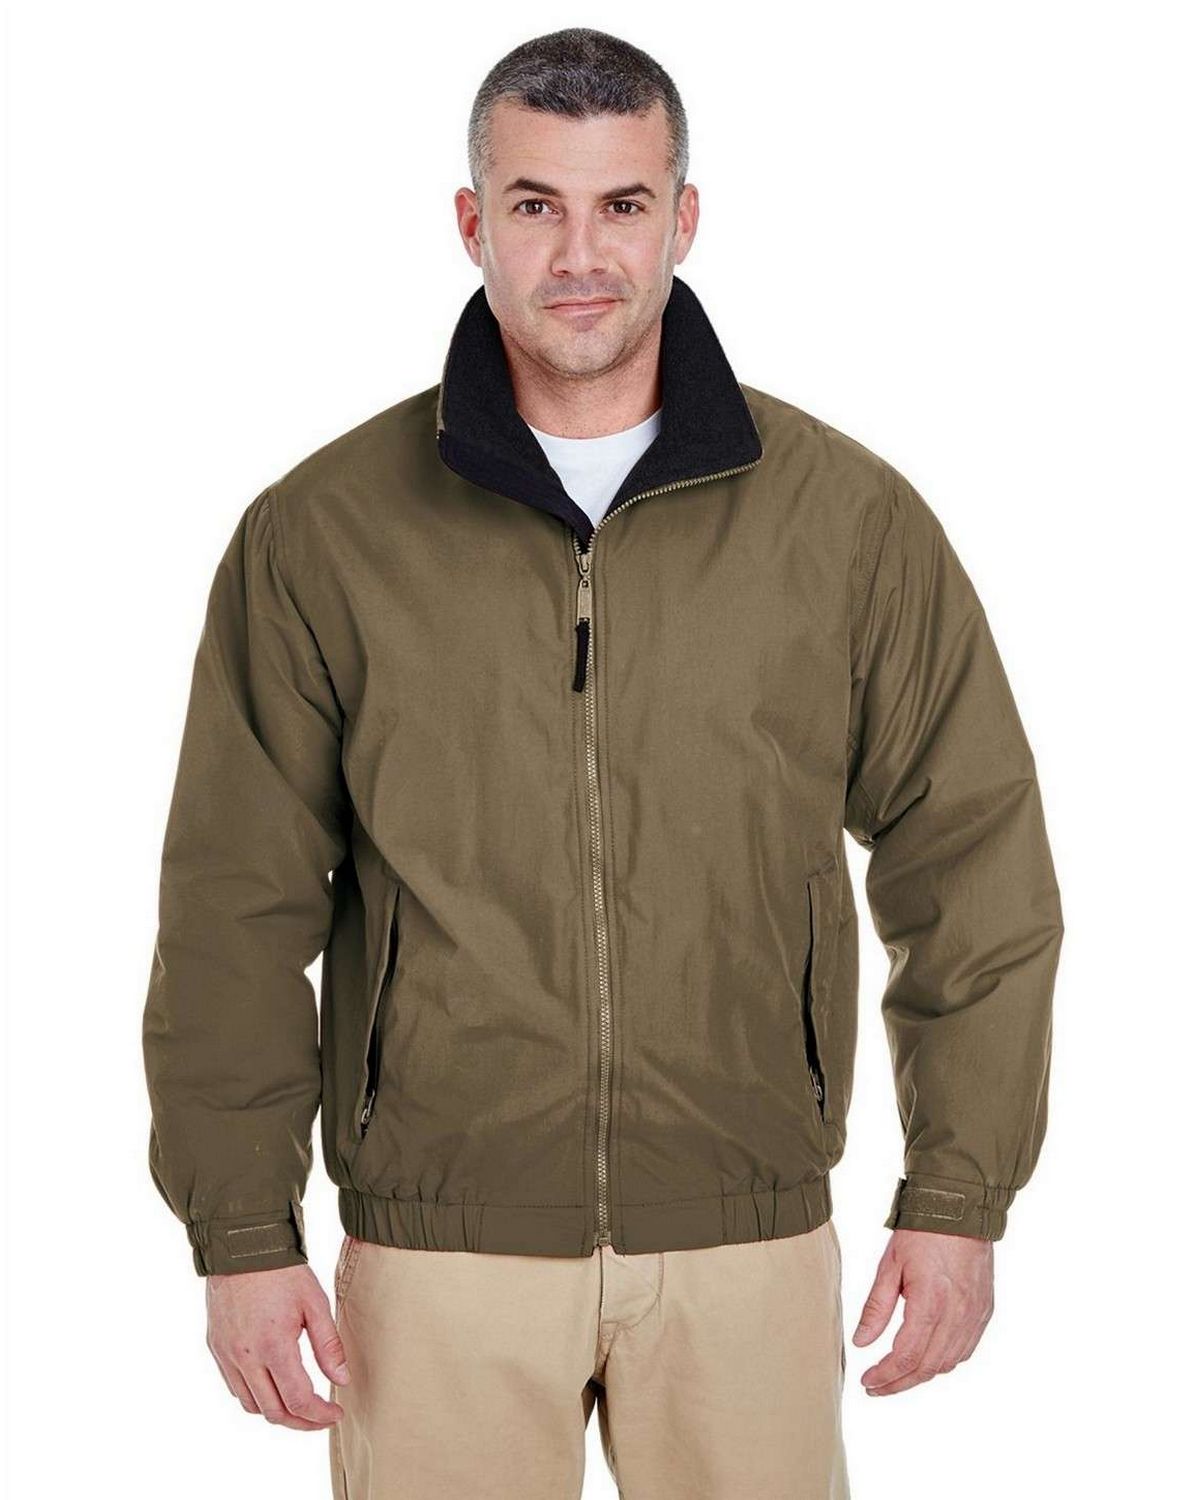 Ultraclub 8921 All-weather Jacket - Shop at ApparelnBags.com